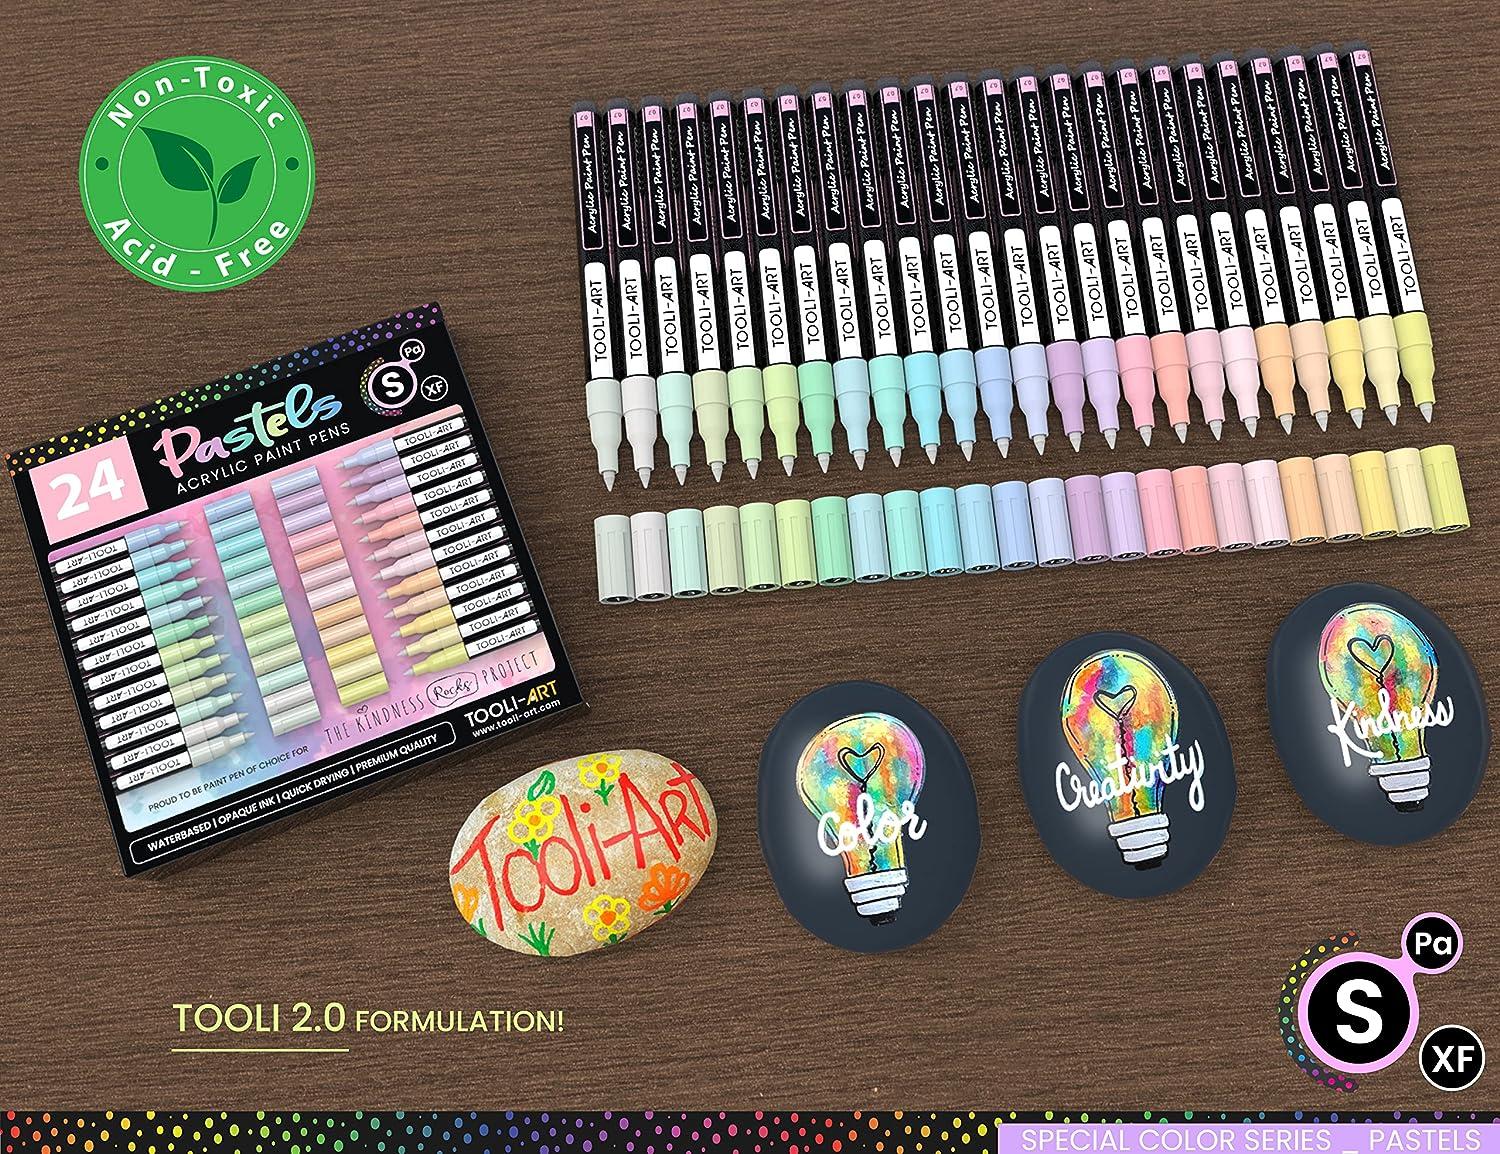 TOOLI-ART Acrylic Paint Markers Paint Pens Special Colors Set for Rock Painting, Canvas, Fabric, Glass, Mugs, Wood, Ceramics, Plastic, Multi-Surface